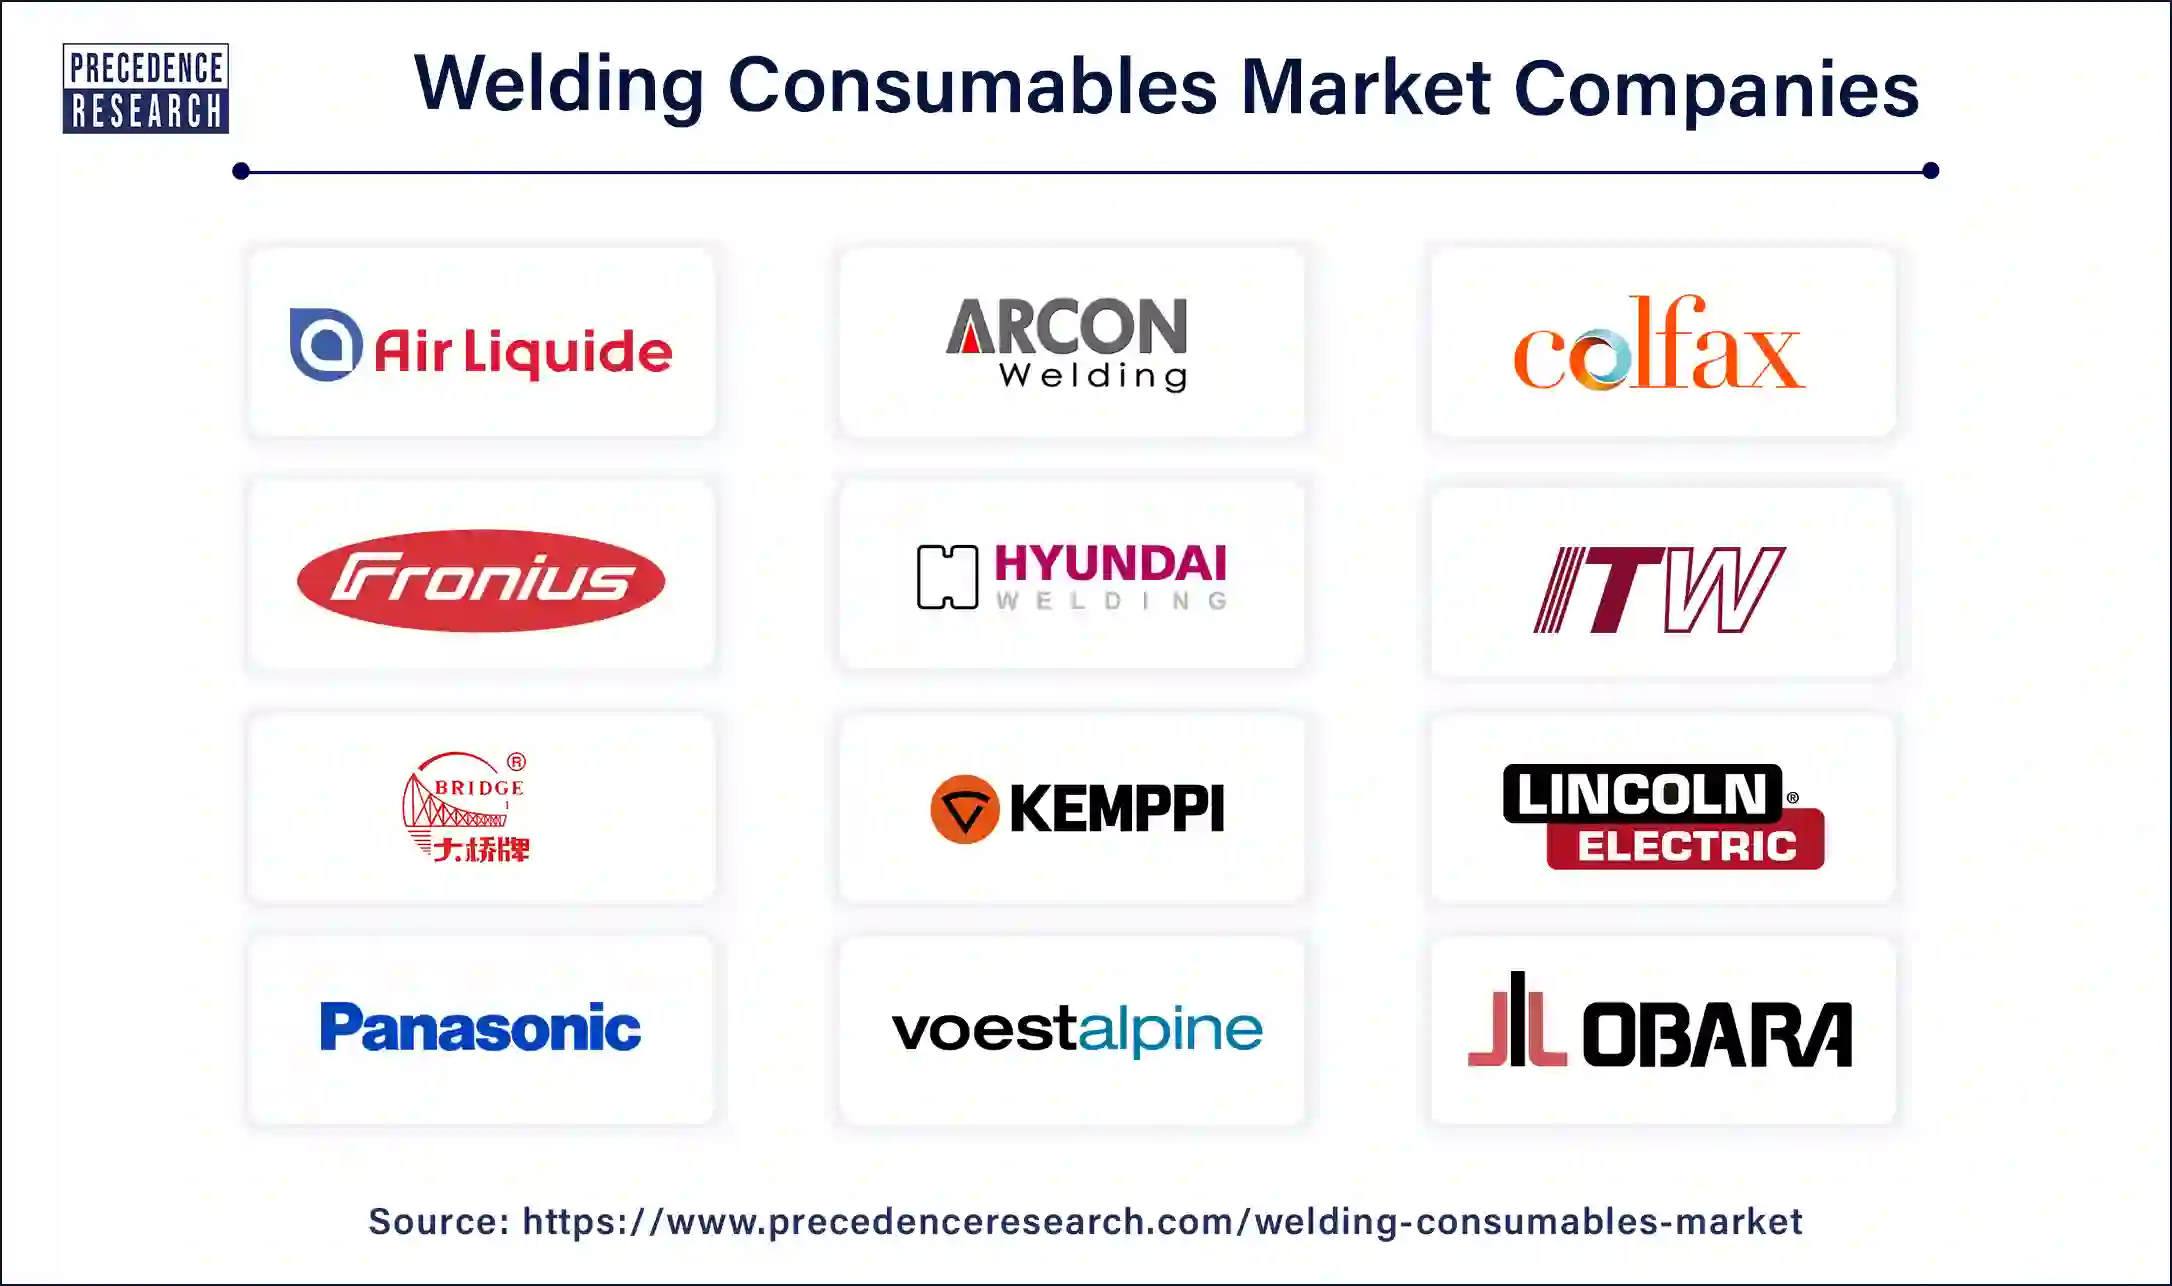 Welding Consumables Companies